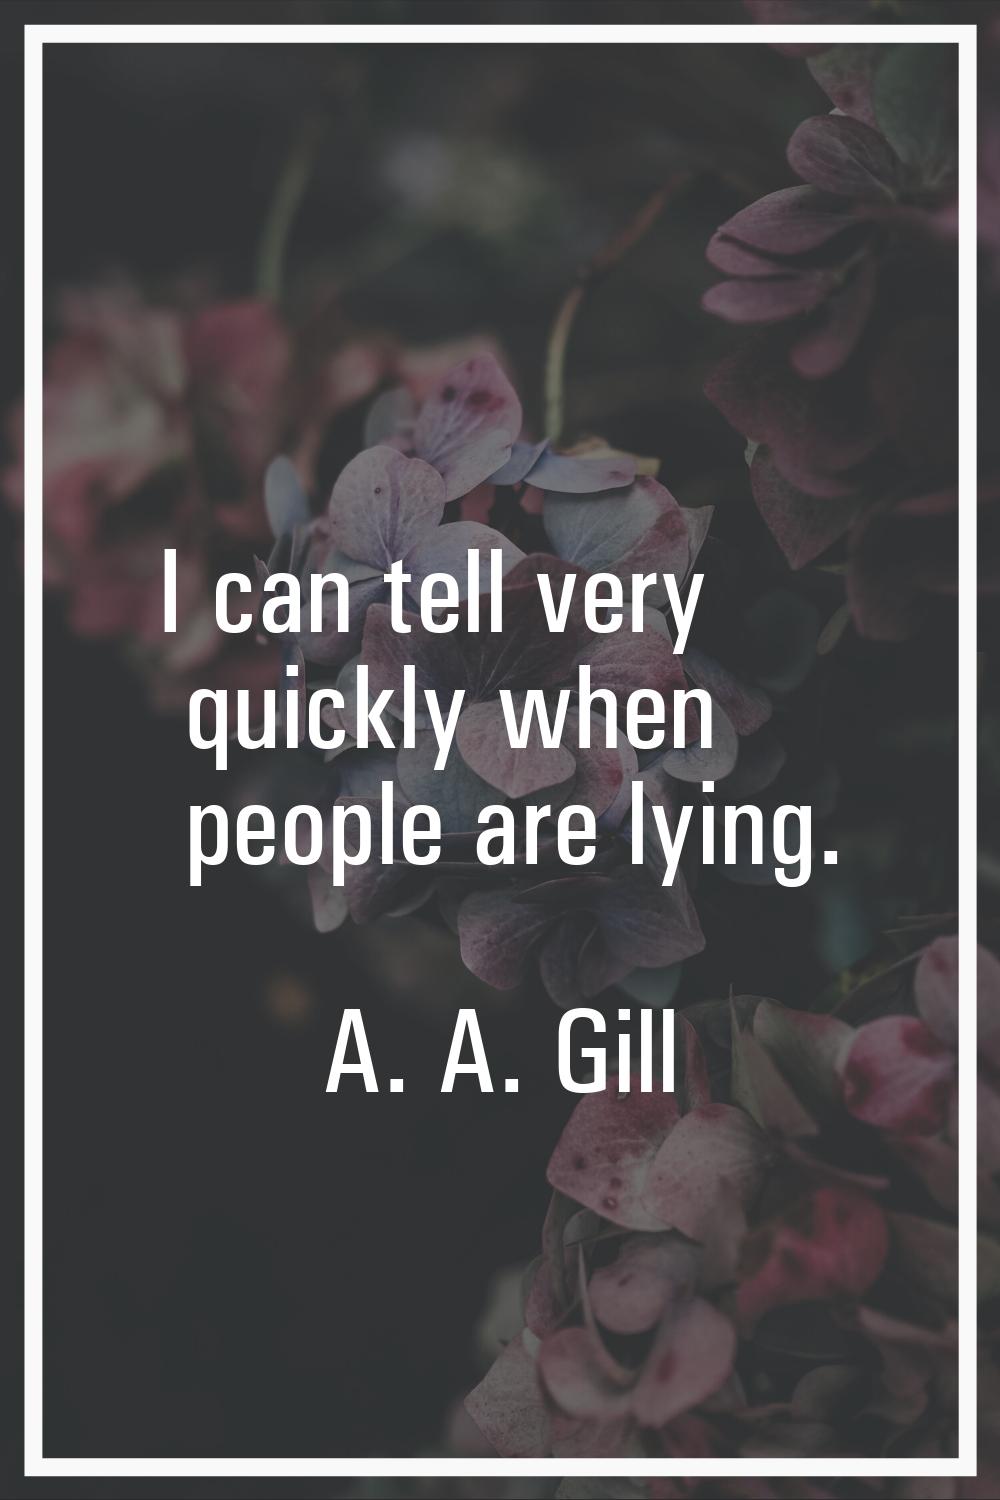 I can tell very quickly when people are lying.